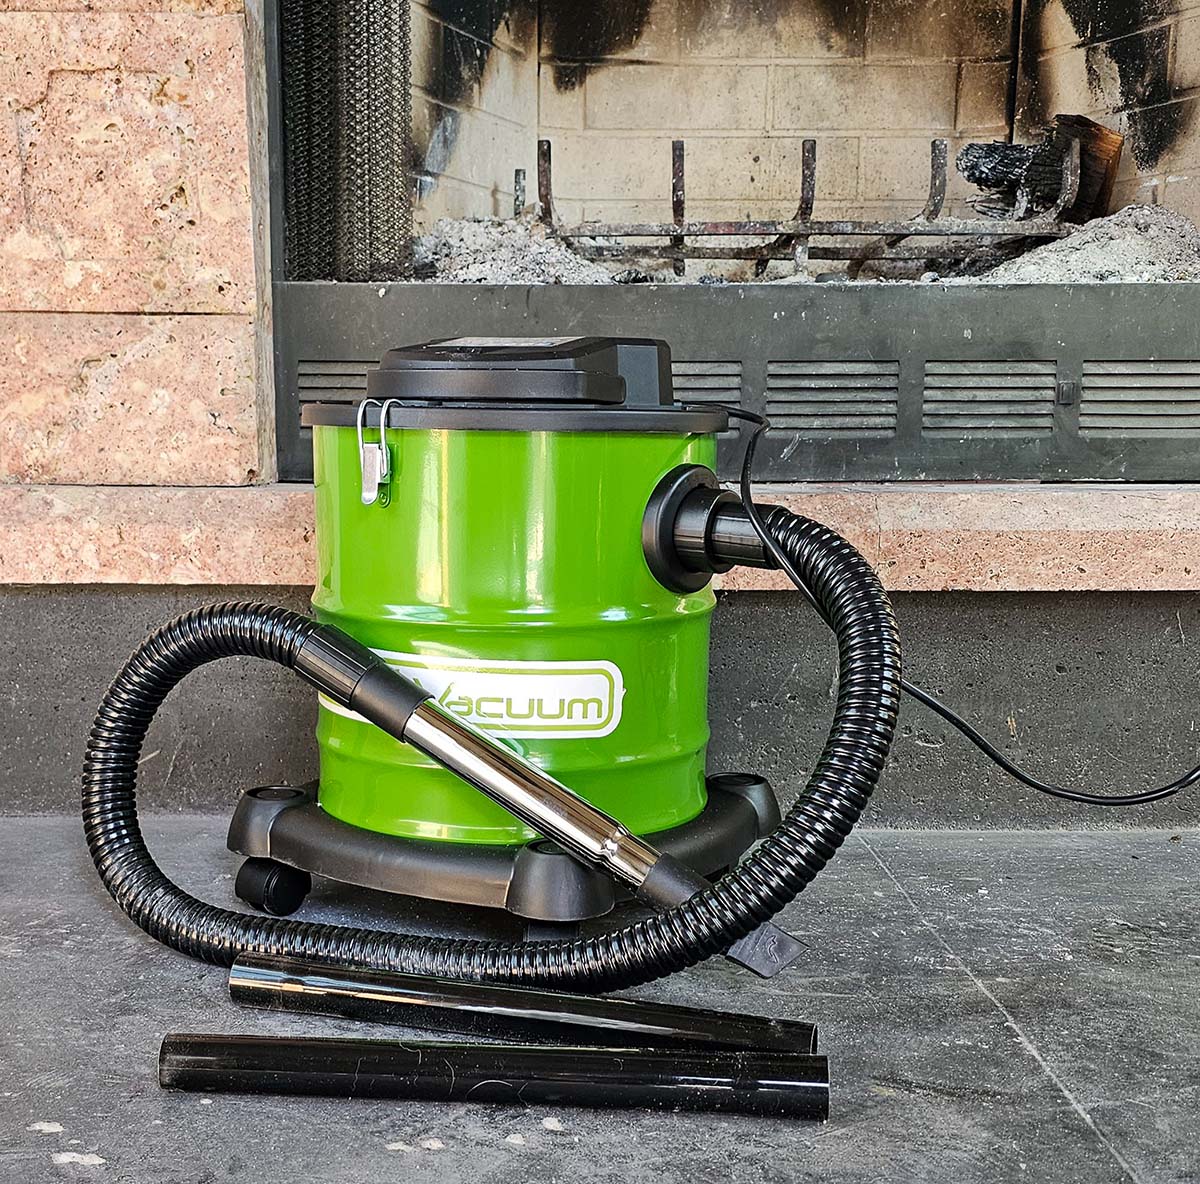 The PowerSmith Ash Vacuum in front of a dirty fireplace full of ashes.